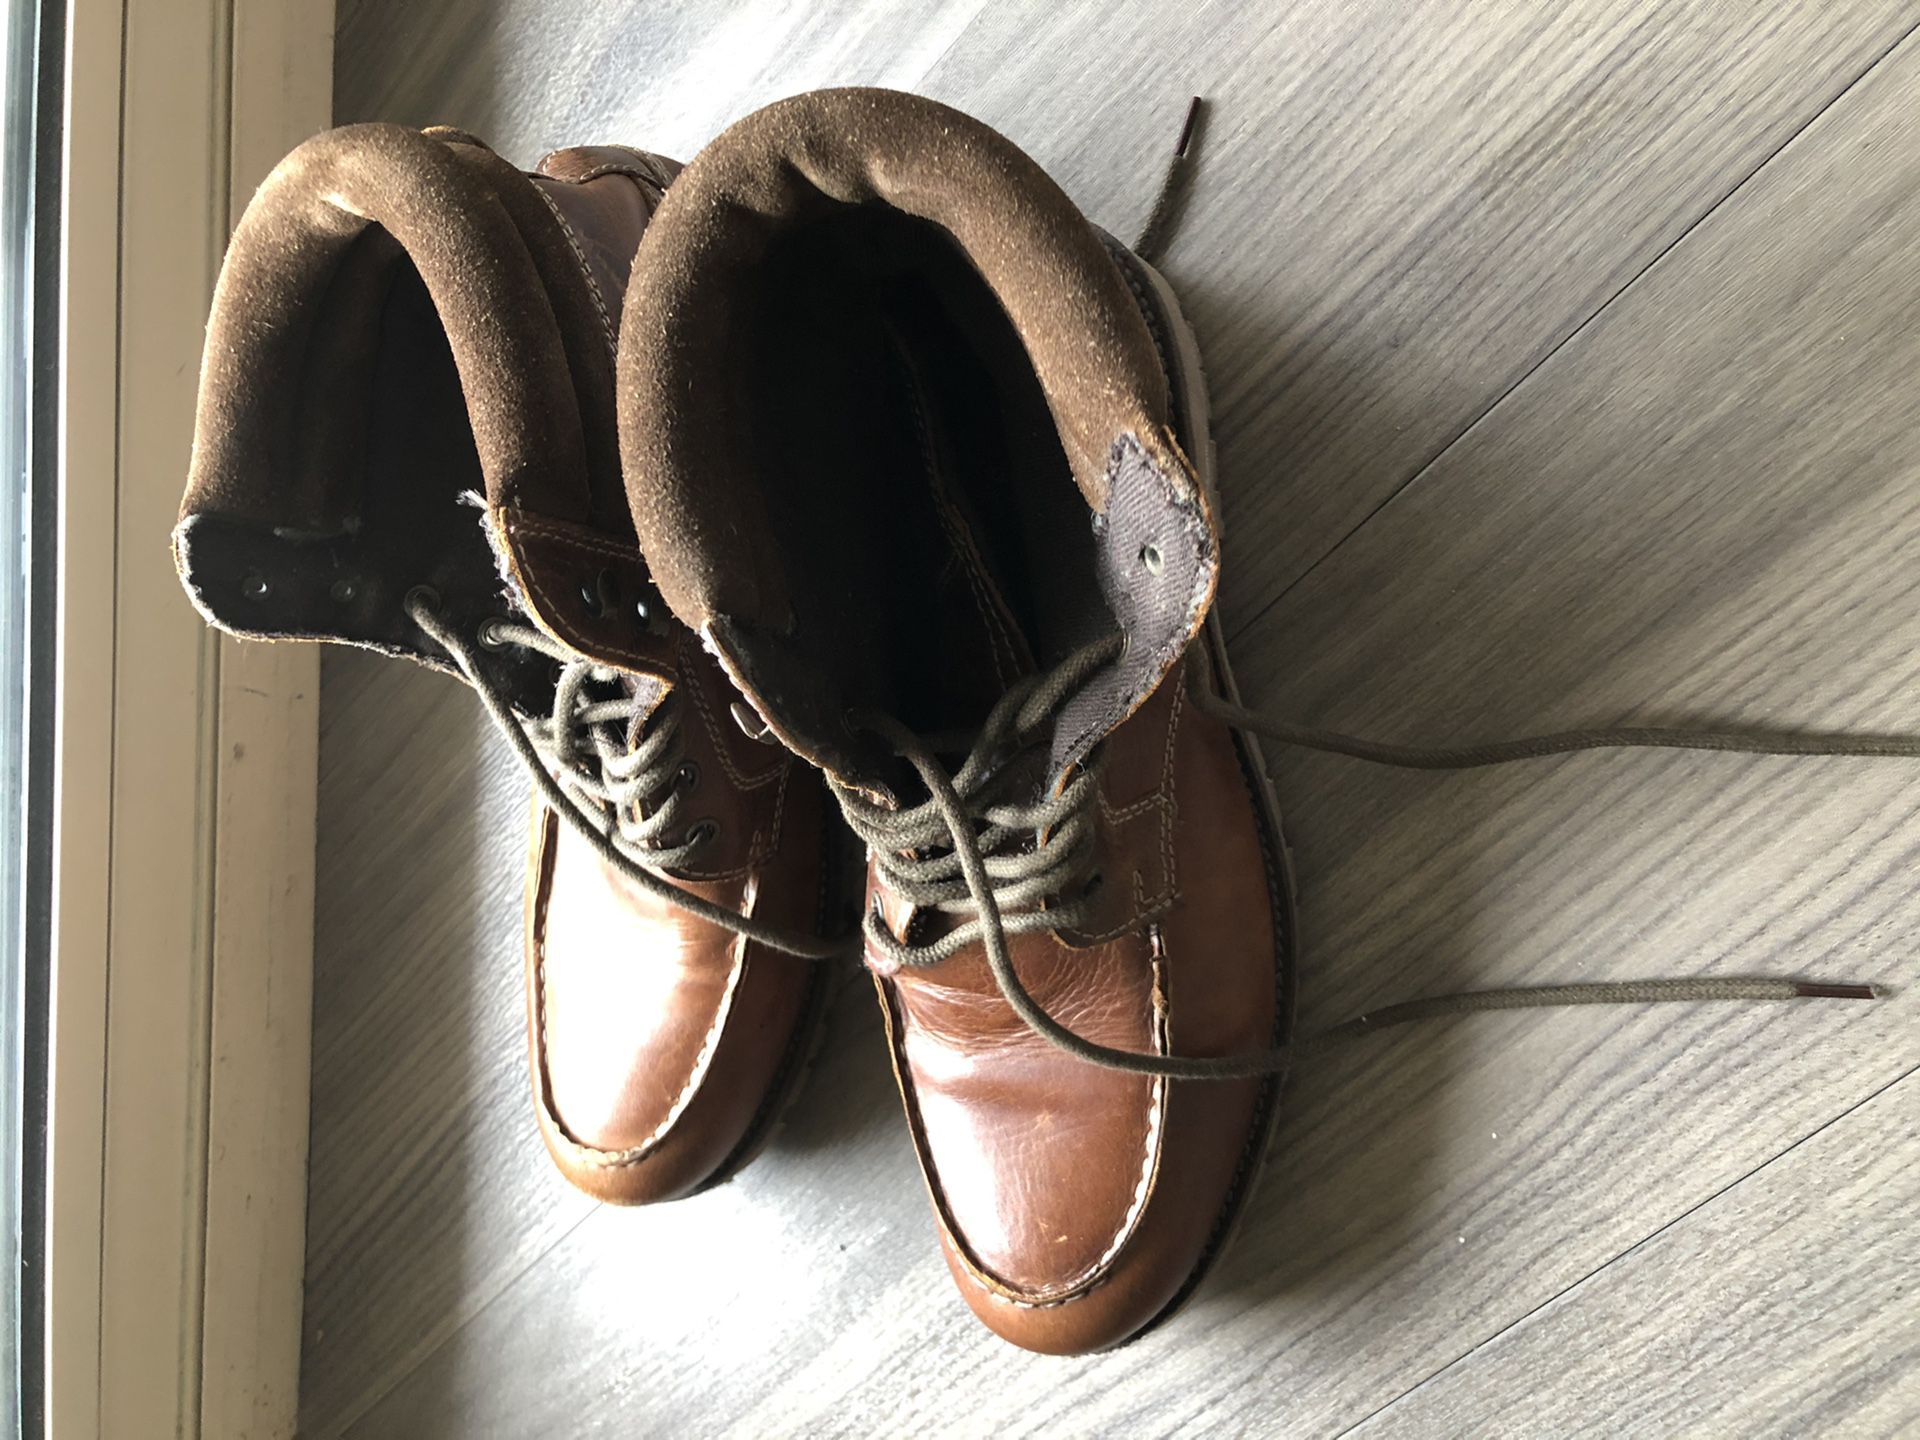 Leather boots (never worn) Size 9 1/2